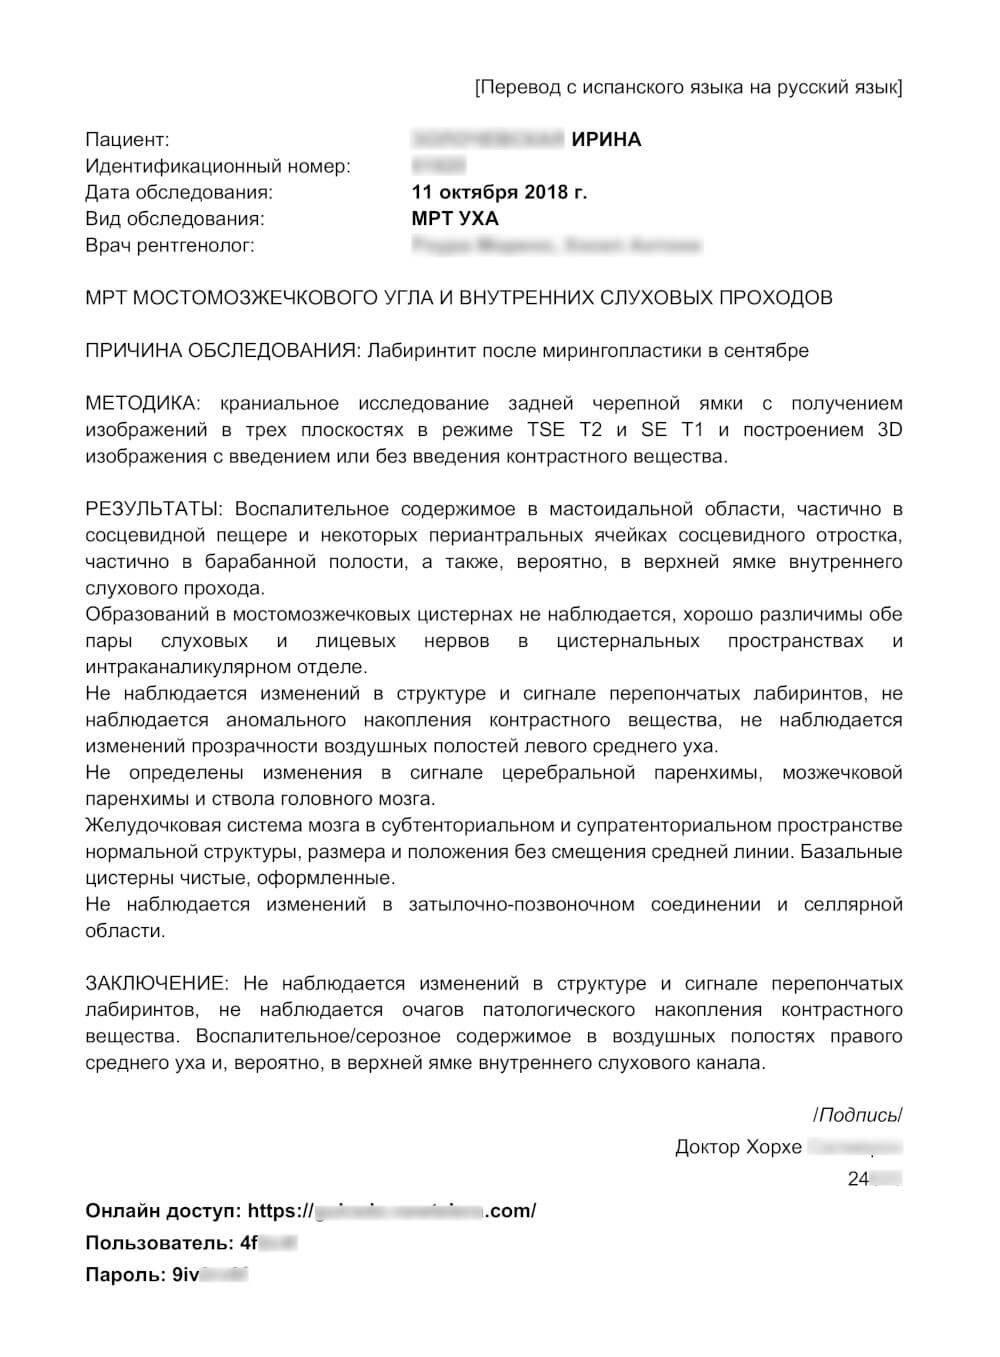 Example of a Russian medical translation (result)